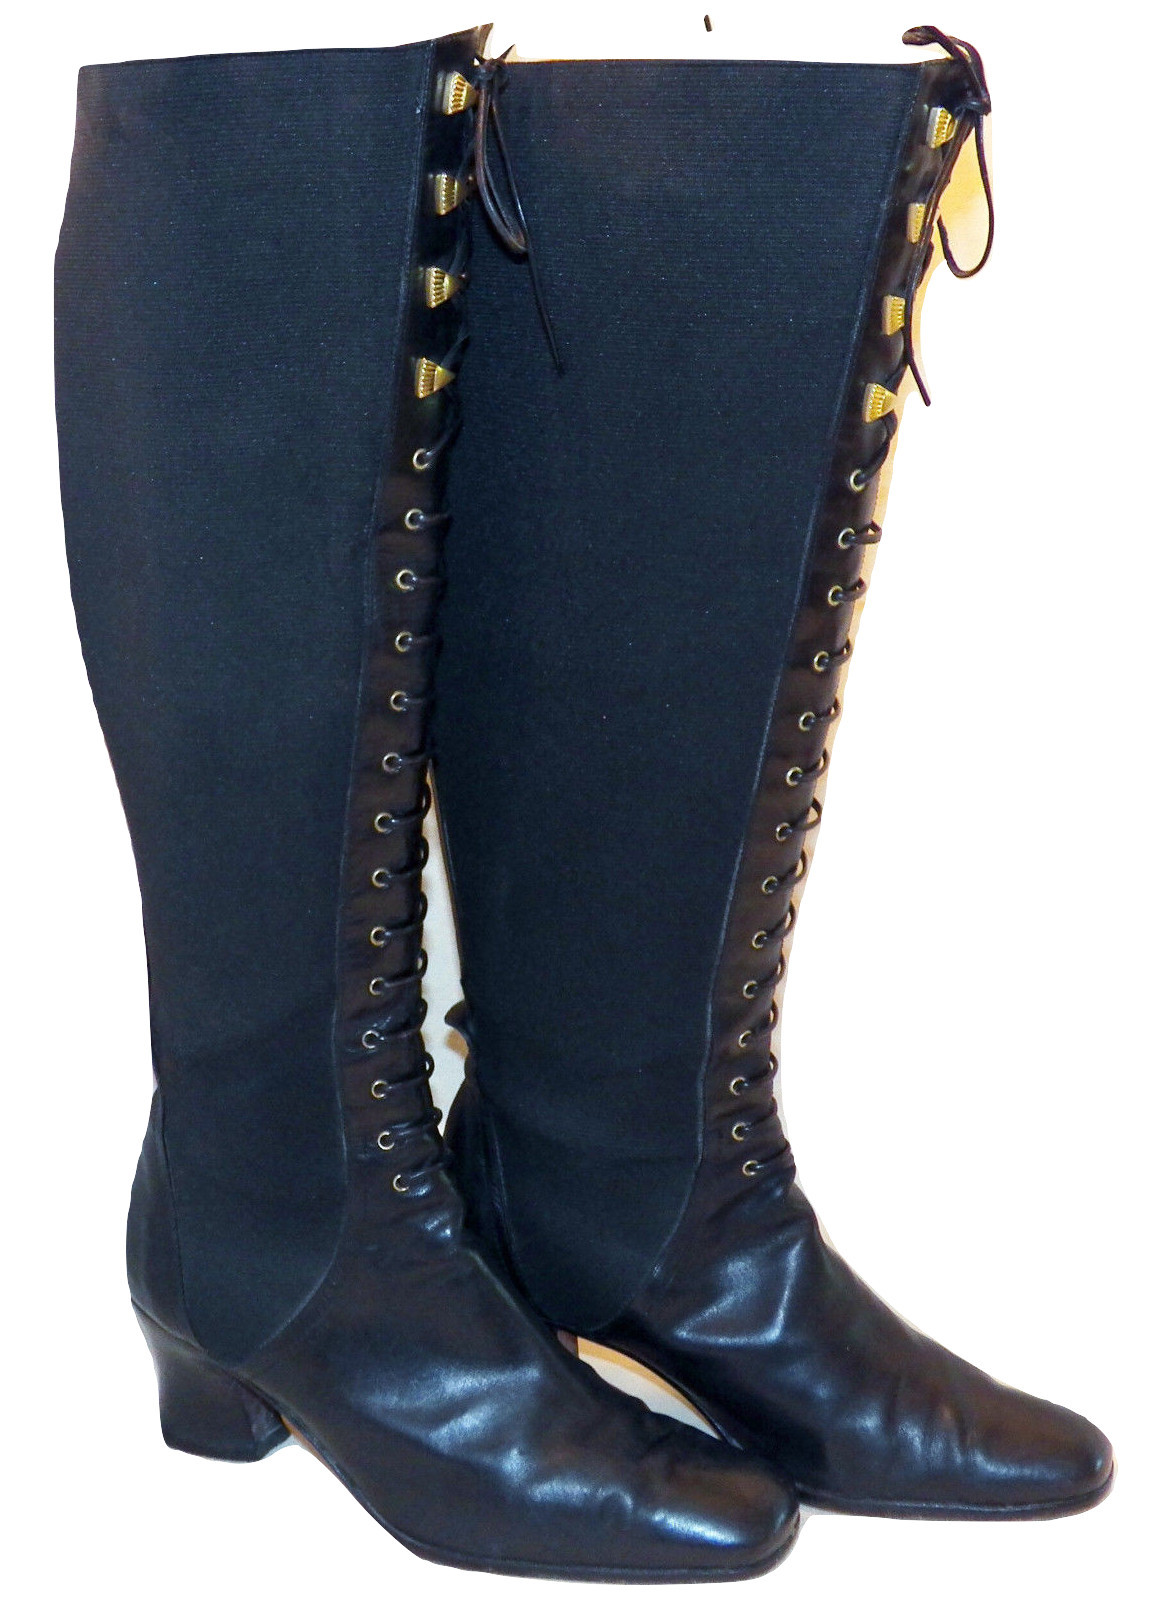 Vintage Via Spiga Italy Super Sexy Black Laced Up Knee High Stretch Boots 7.5 B - $119.99